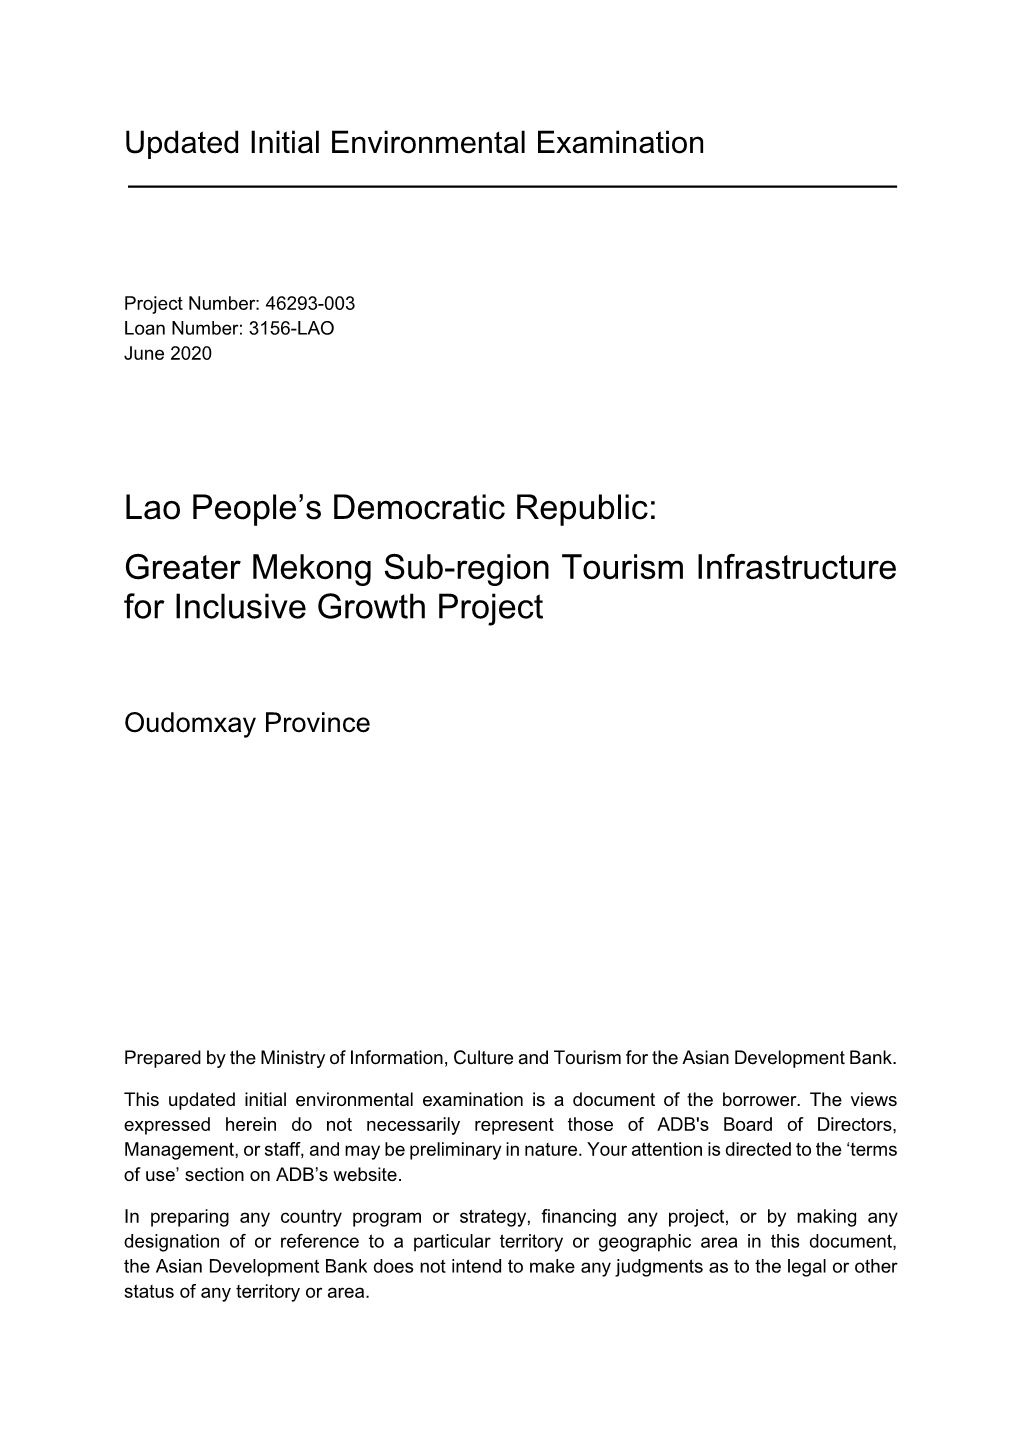 46293-003: Greater Mekong Subregion Tourism Infrastructure For